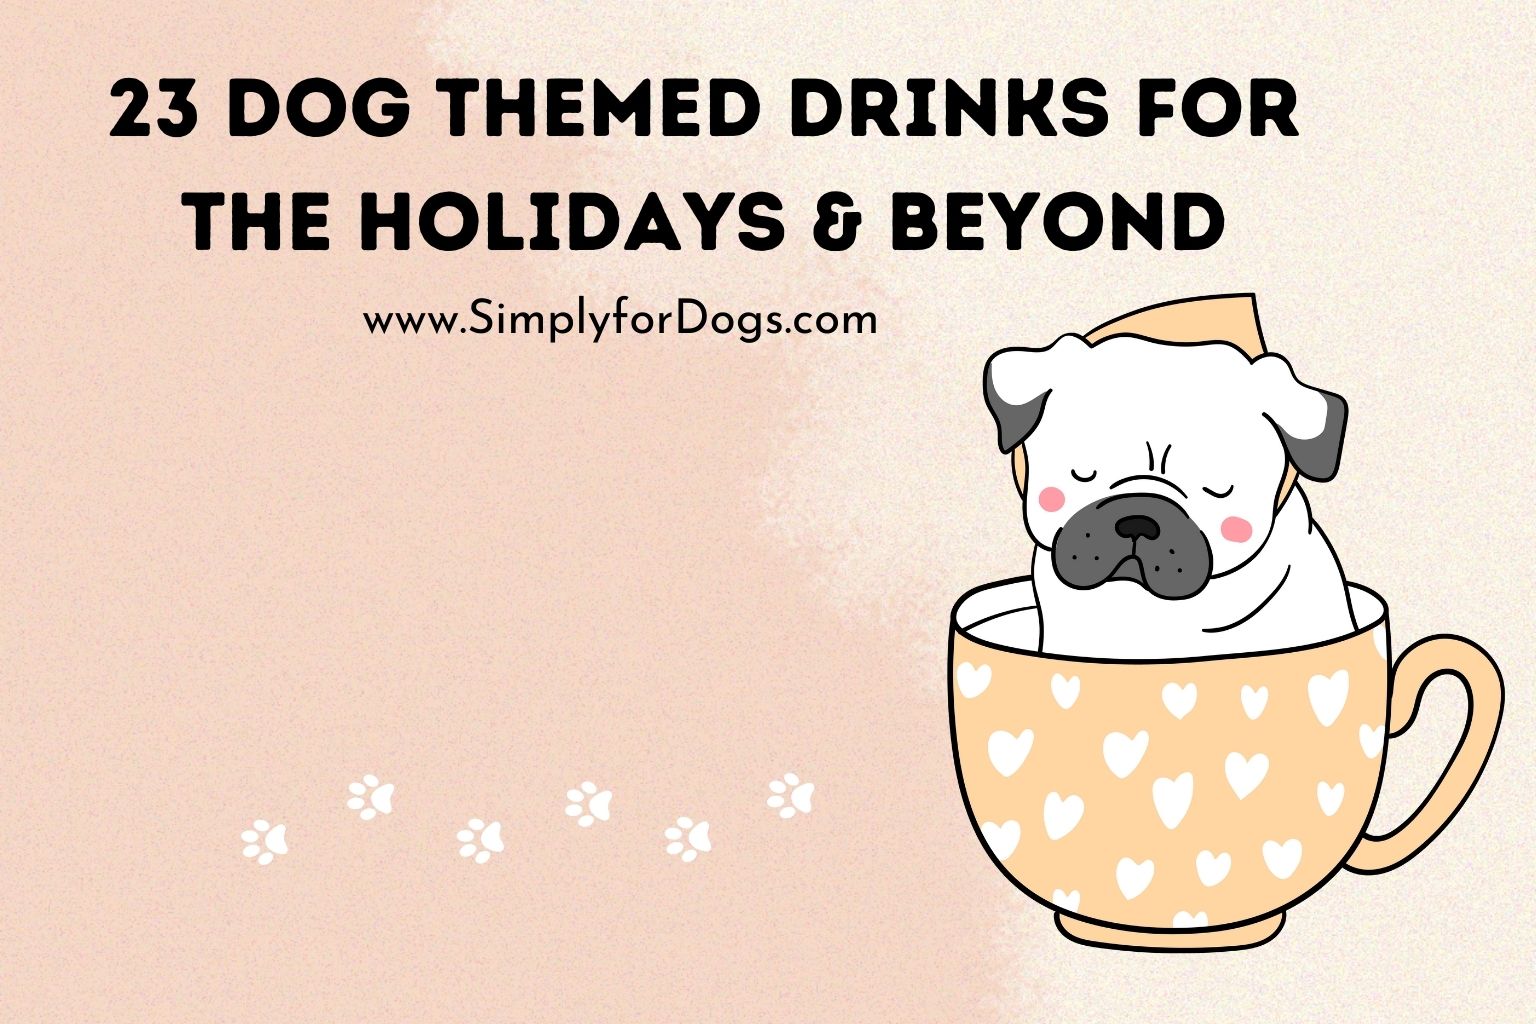 23 Dog Themed Drinks for the Holidays & Beyond